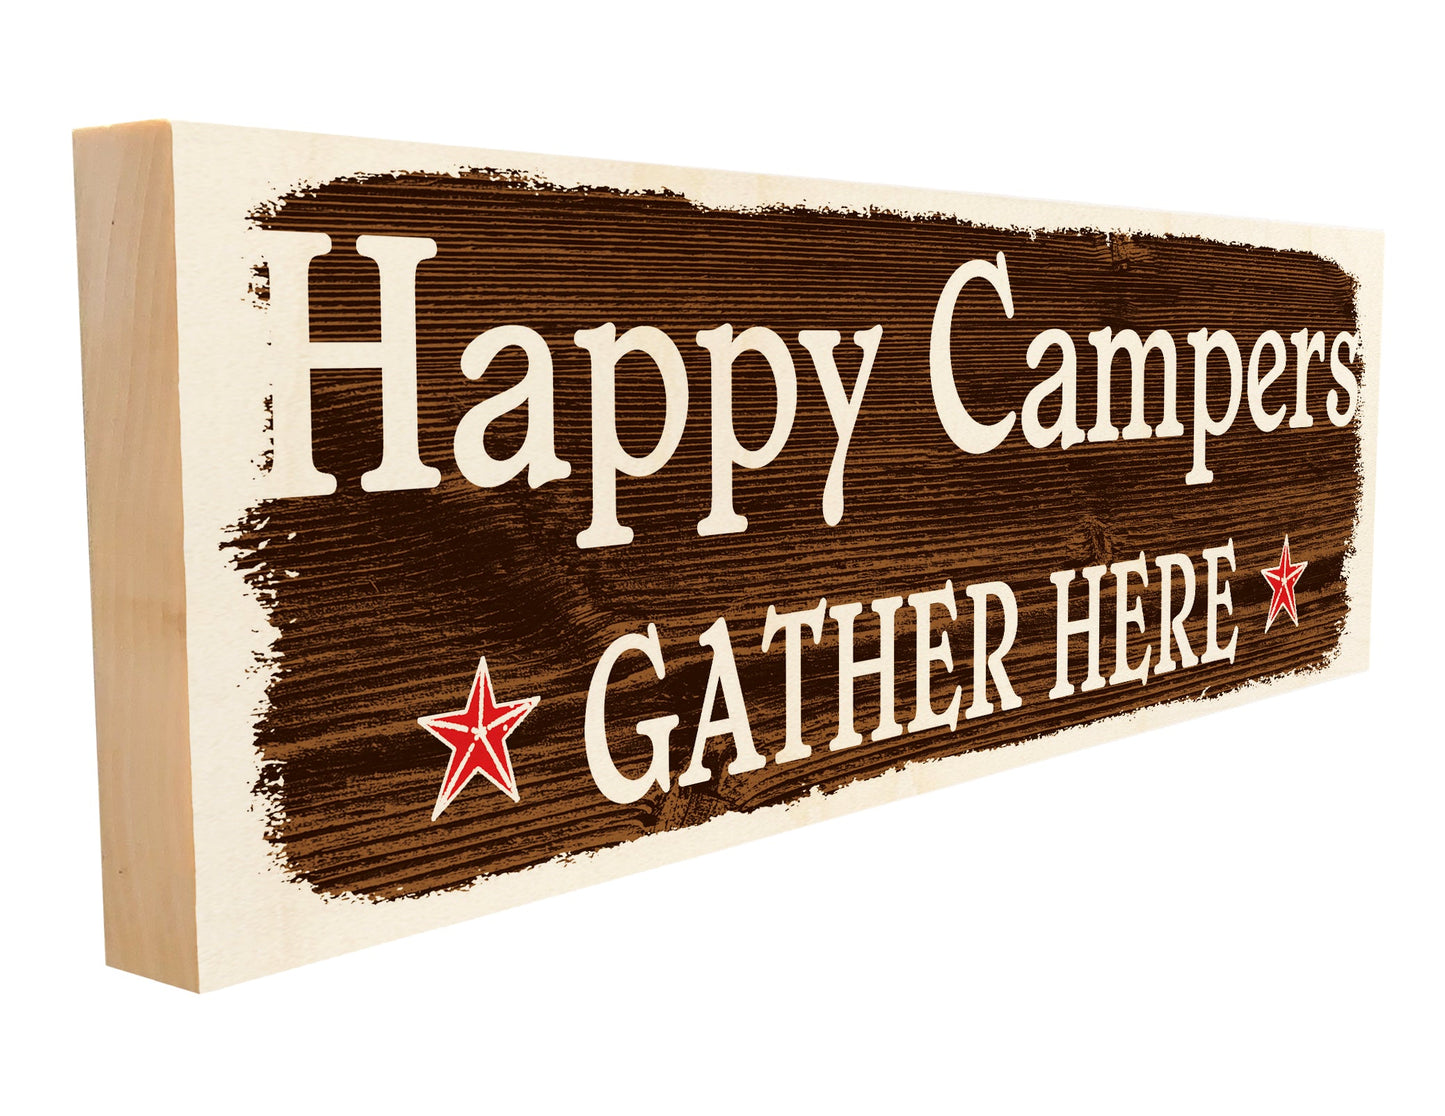 Happy Campers Gather Here.